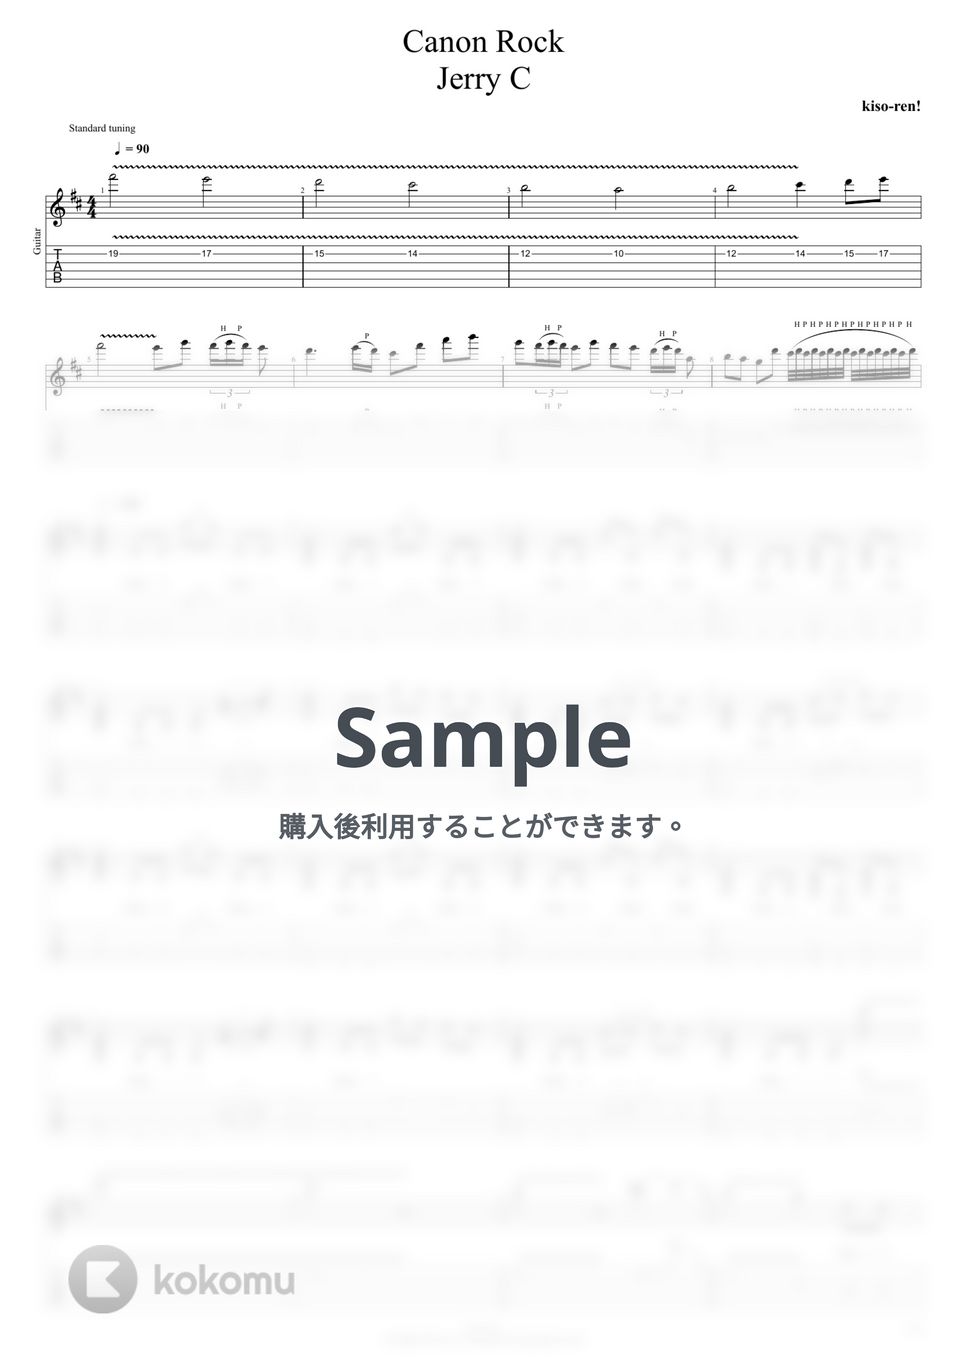 JerryC - カノンロック Canon Rock Full Guitar Score TAB  JerryC (TAB PDF & Guitar Pro files.（GPX）) by Technical Guitar